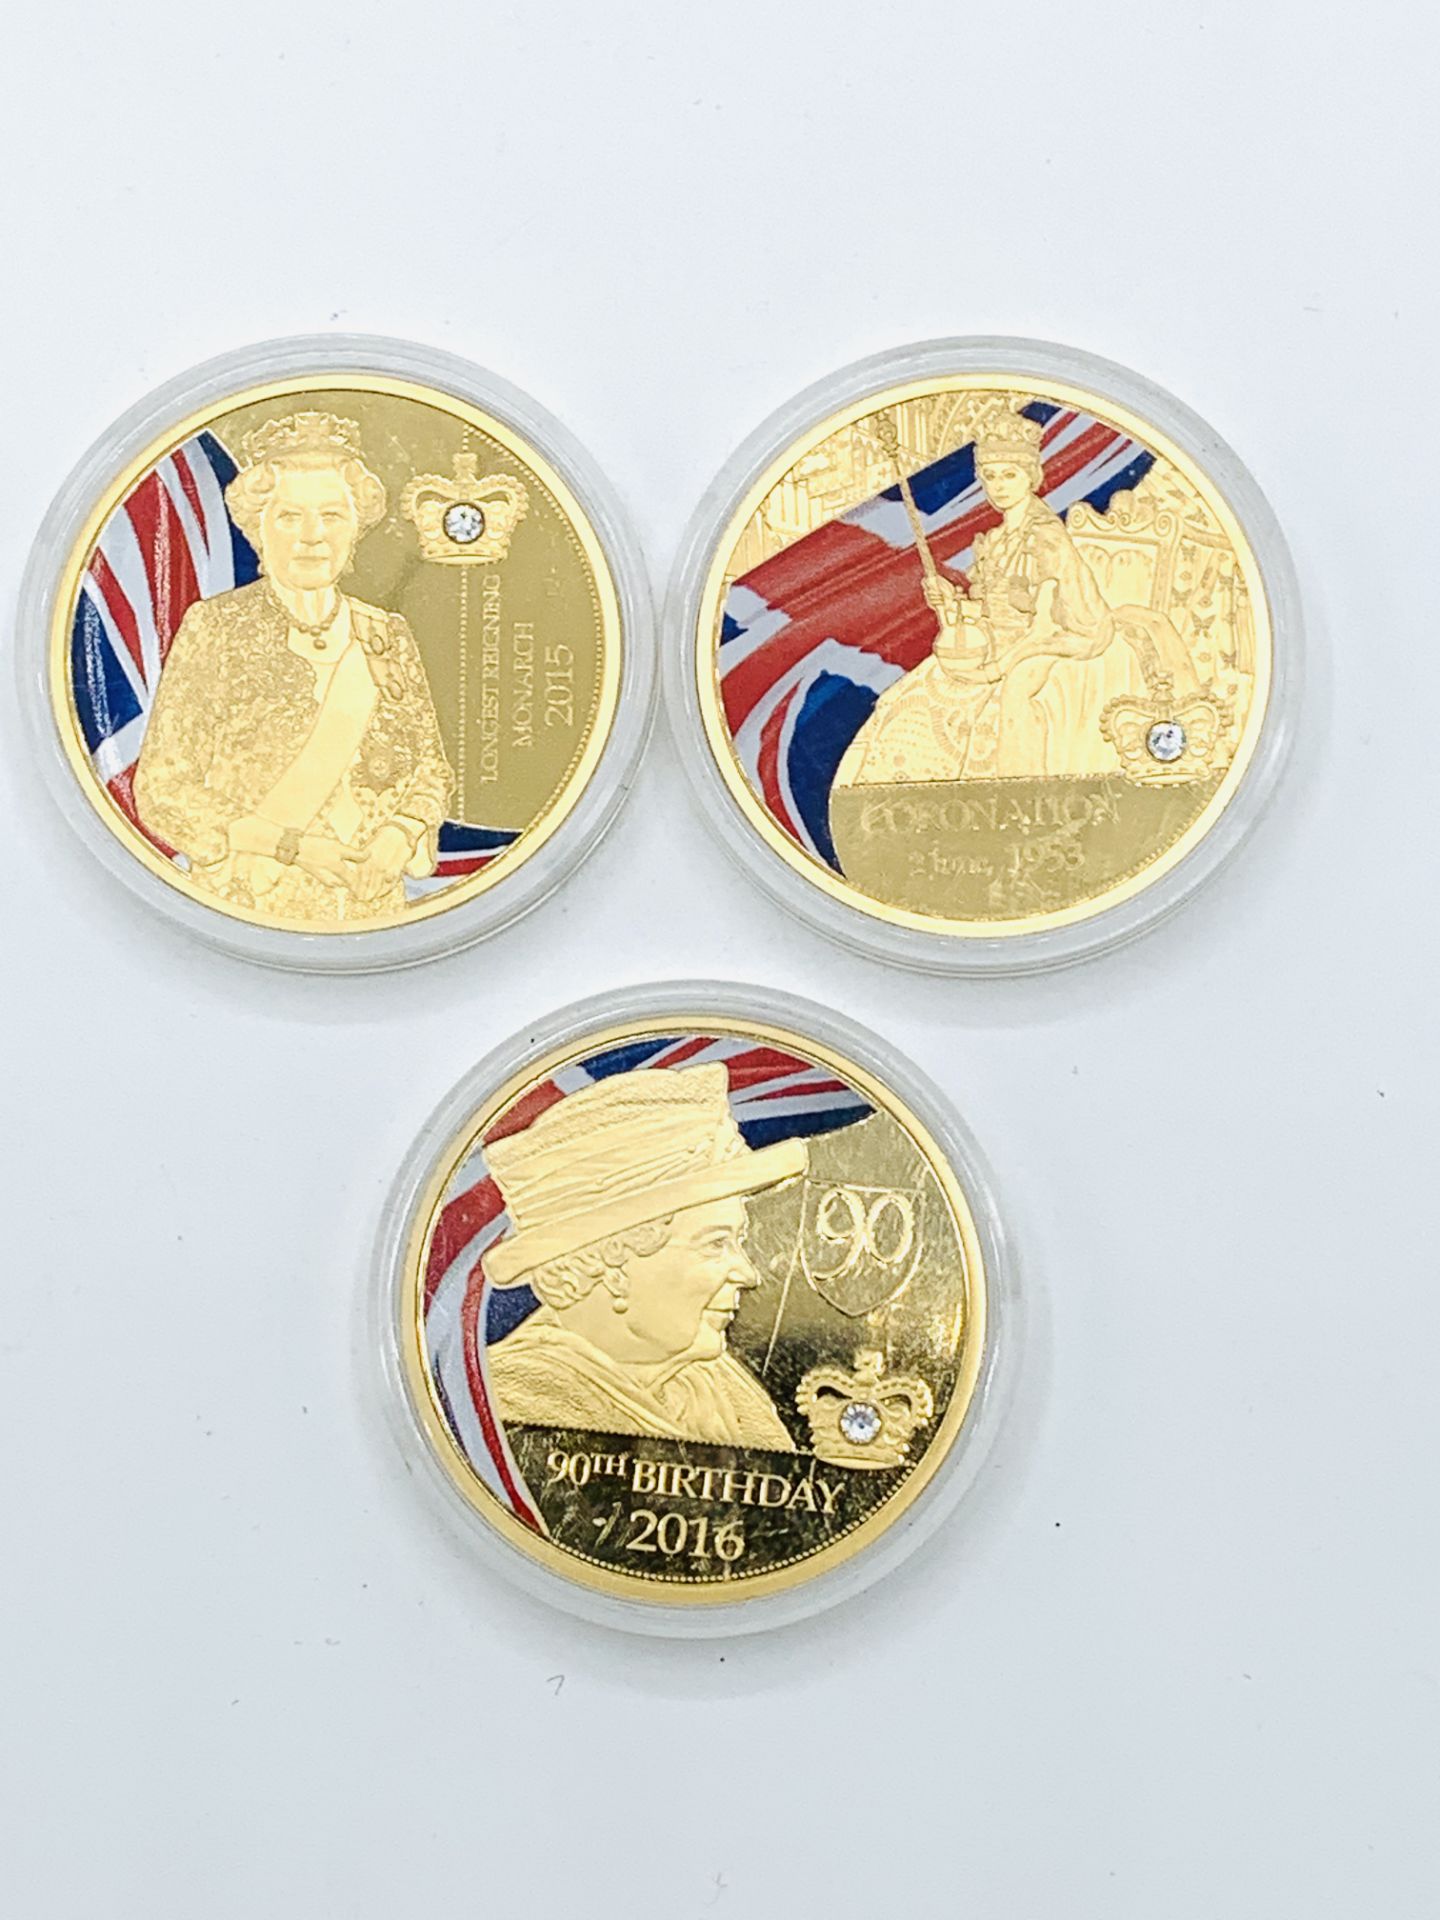 Three gold plated commemorative coins